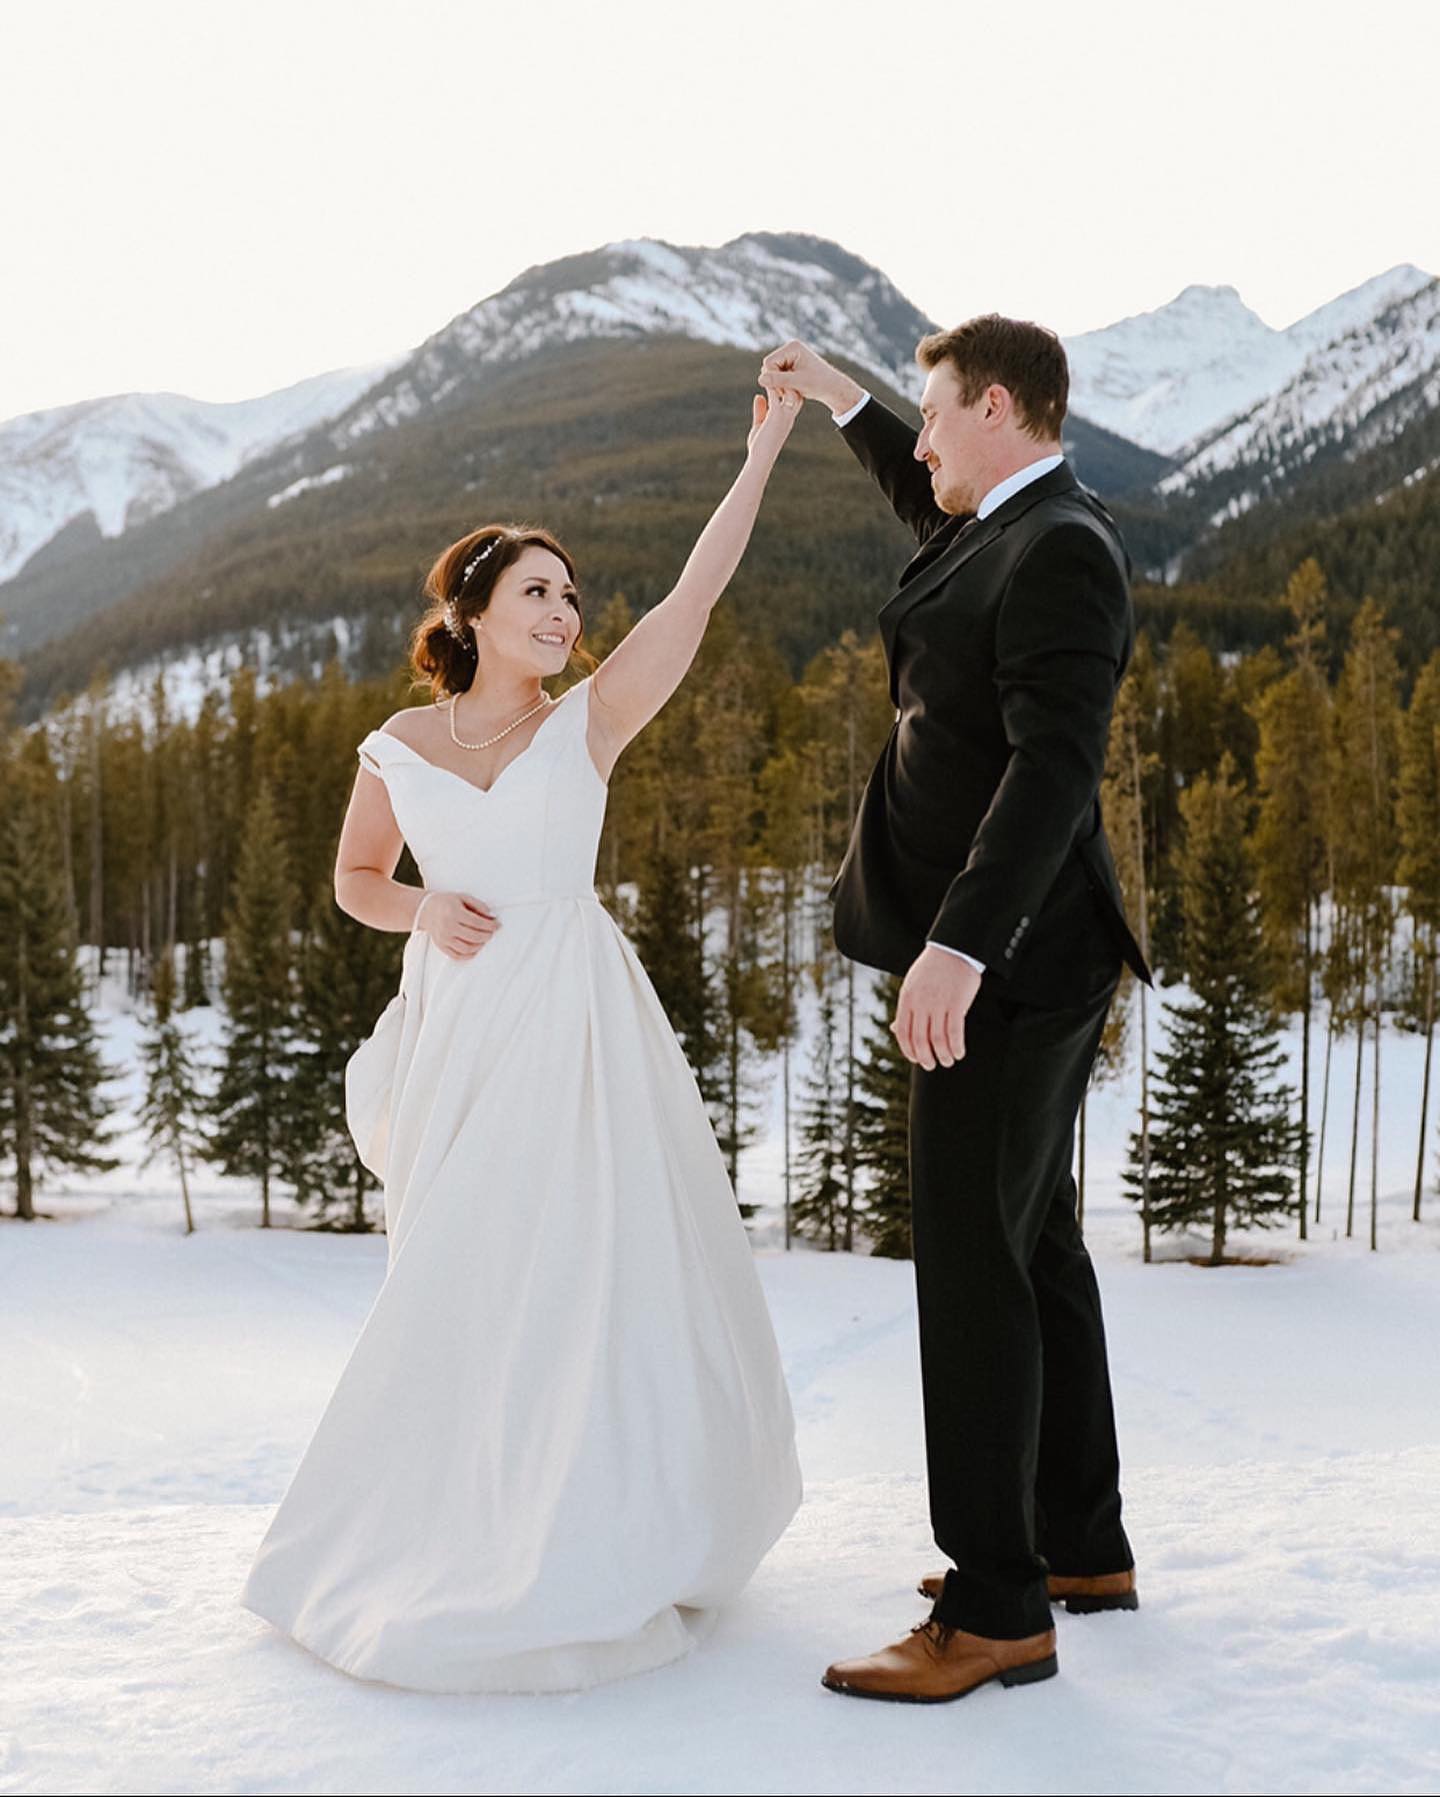 bride and groom in a winter wedding